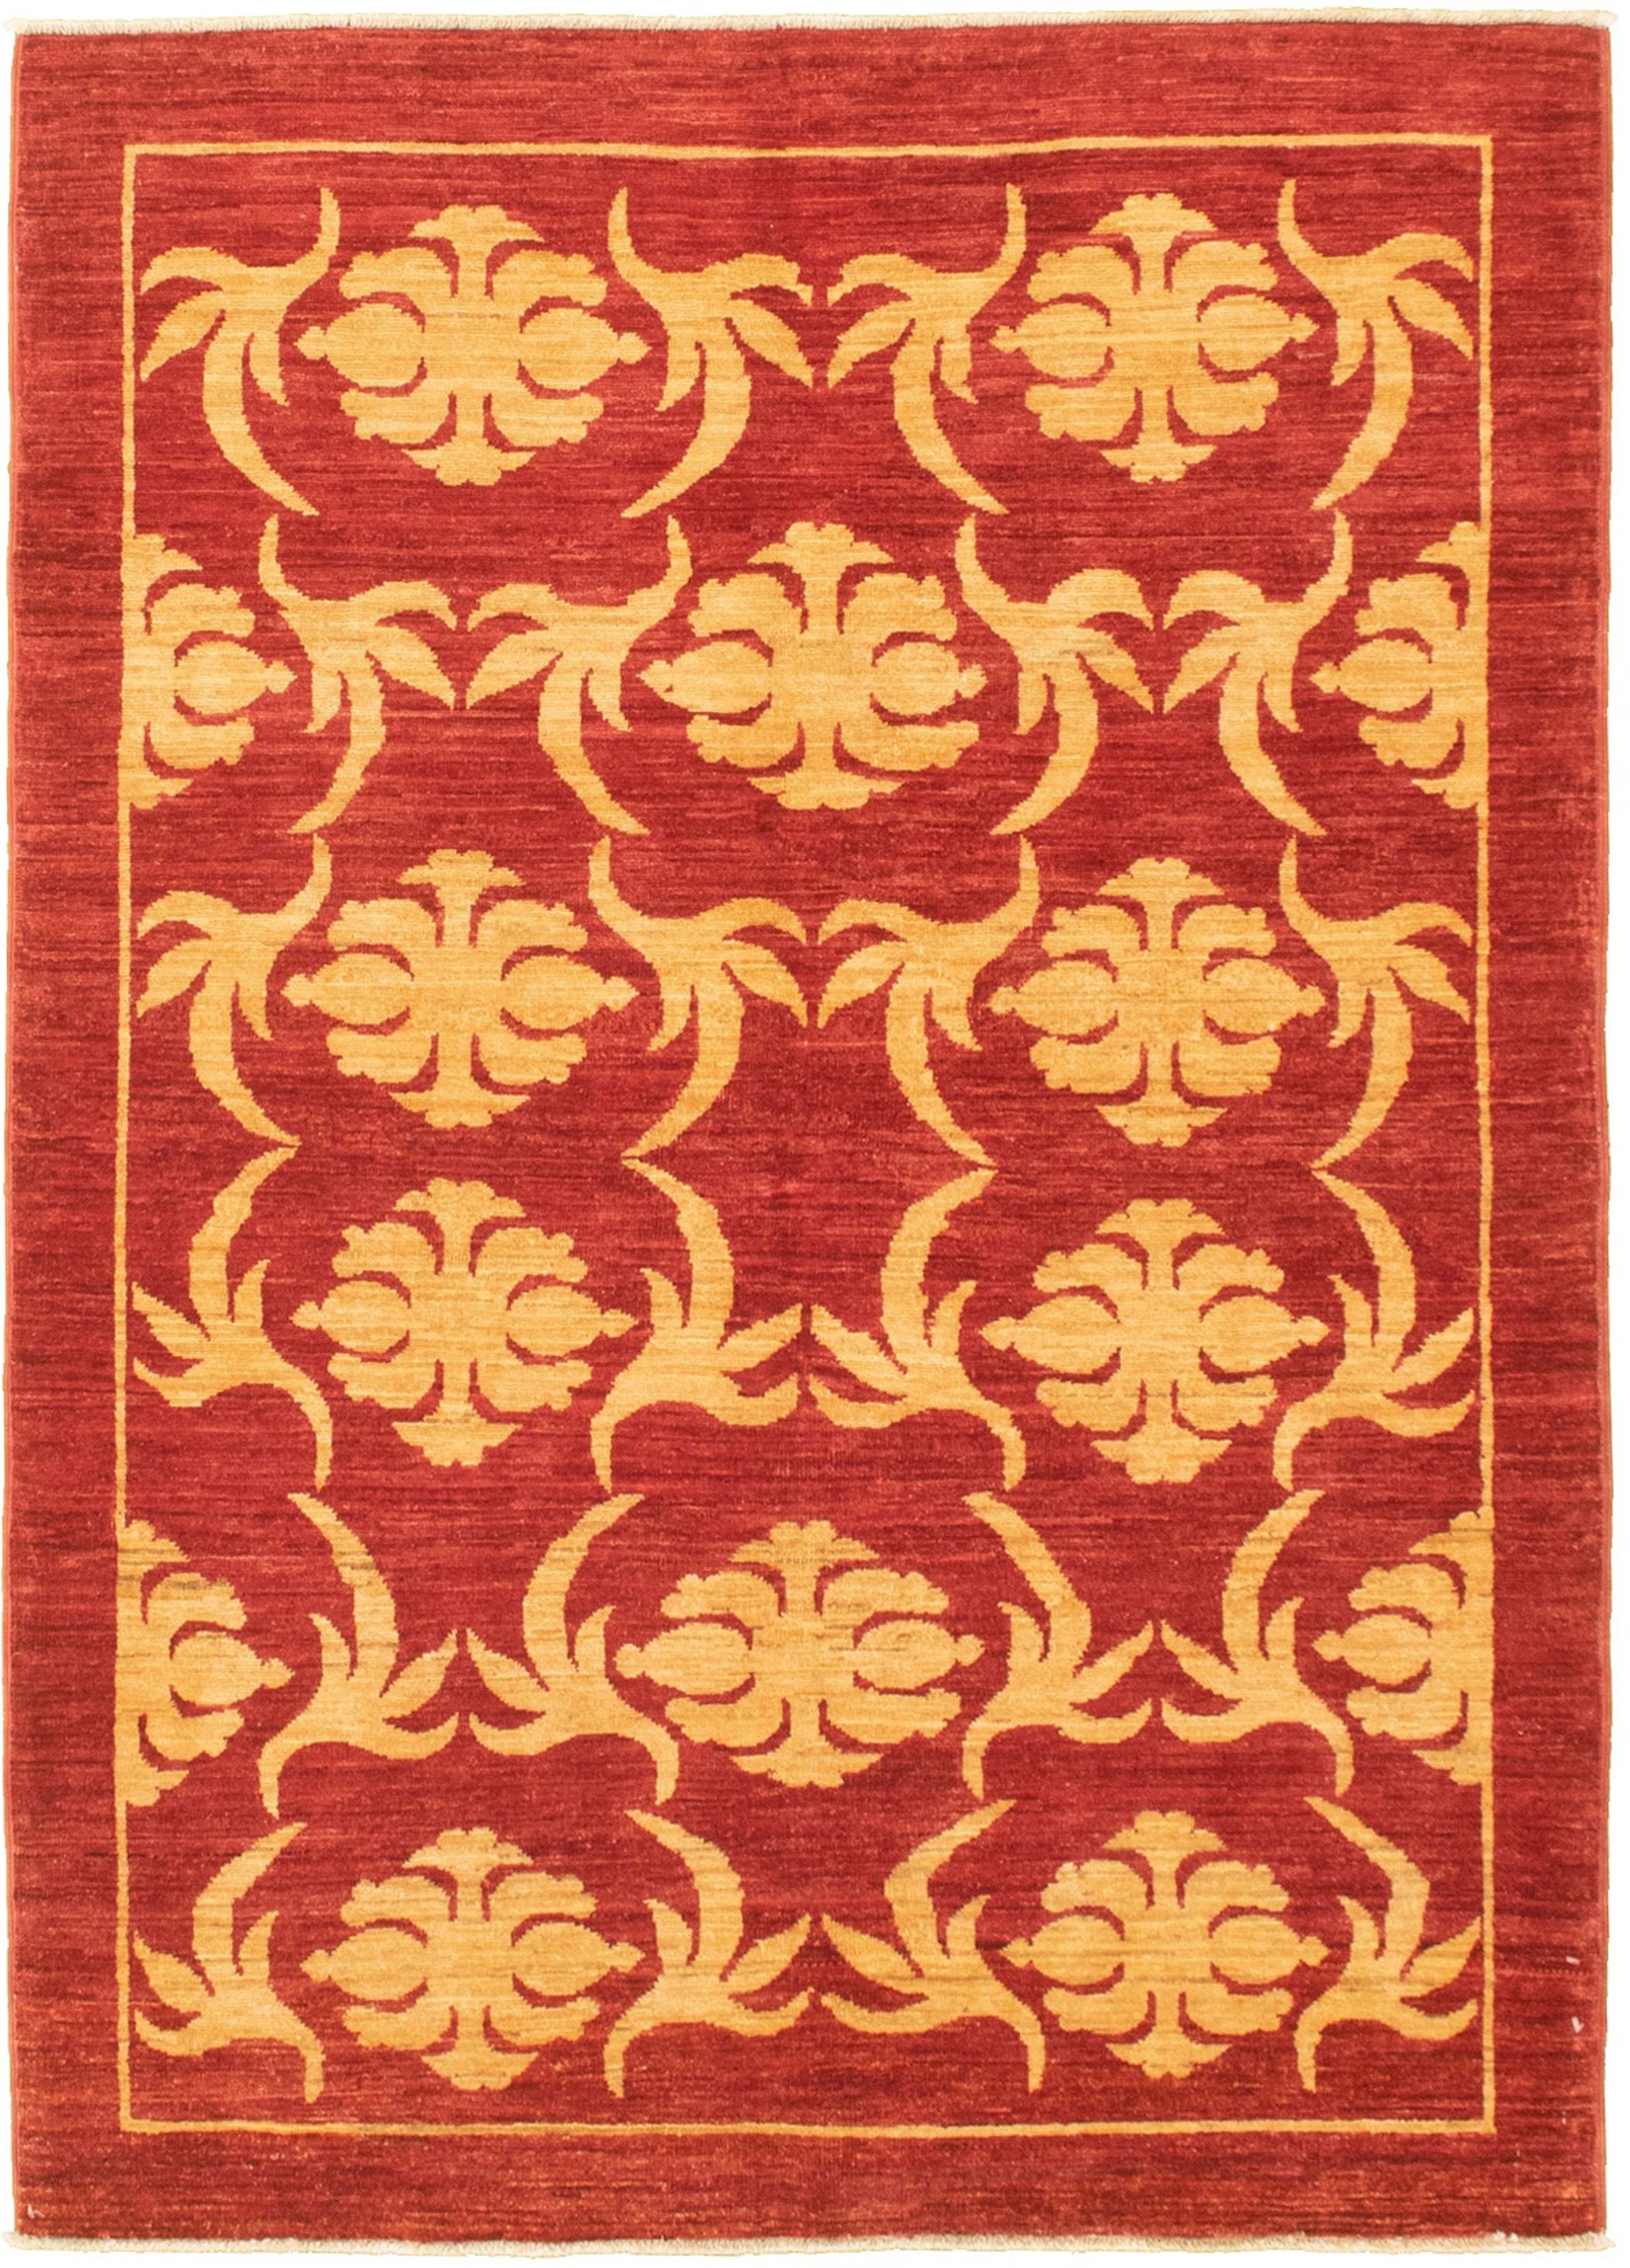 Hand-knotted Peshawar Ziegler Red Wool Rug 4'1" x 5'10" Size: 4'1" x 5'10"  